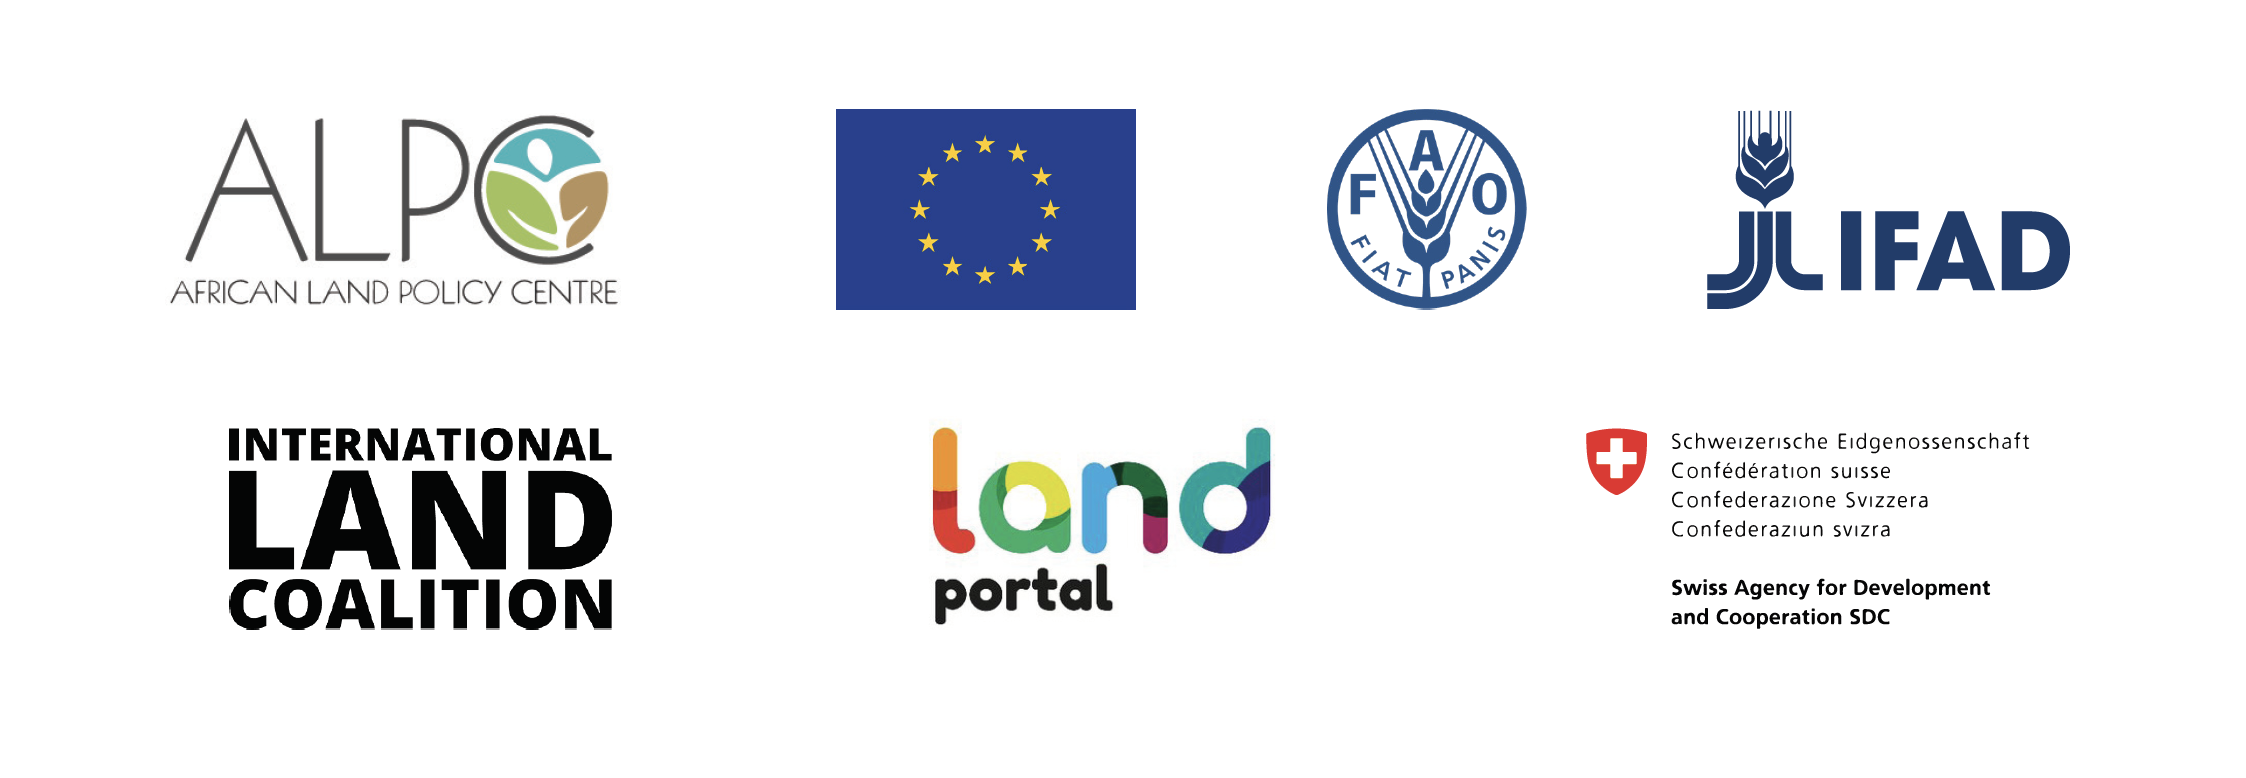 9th Capitalization Meeting of the EU Land Governance Programme - Day 3 - WEBINAR ON COVID-19 AND TENURE SECURITY